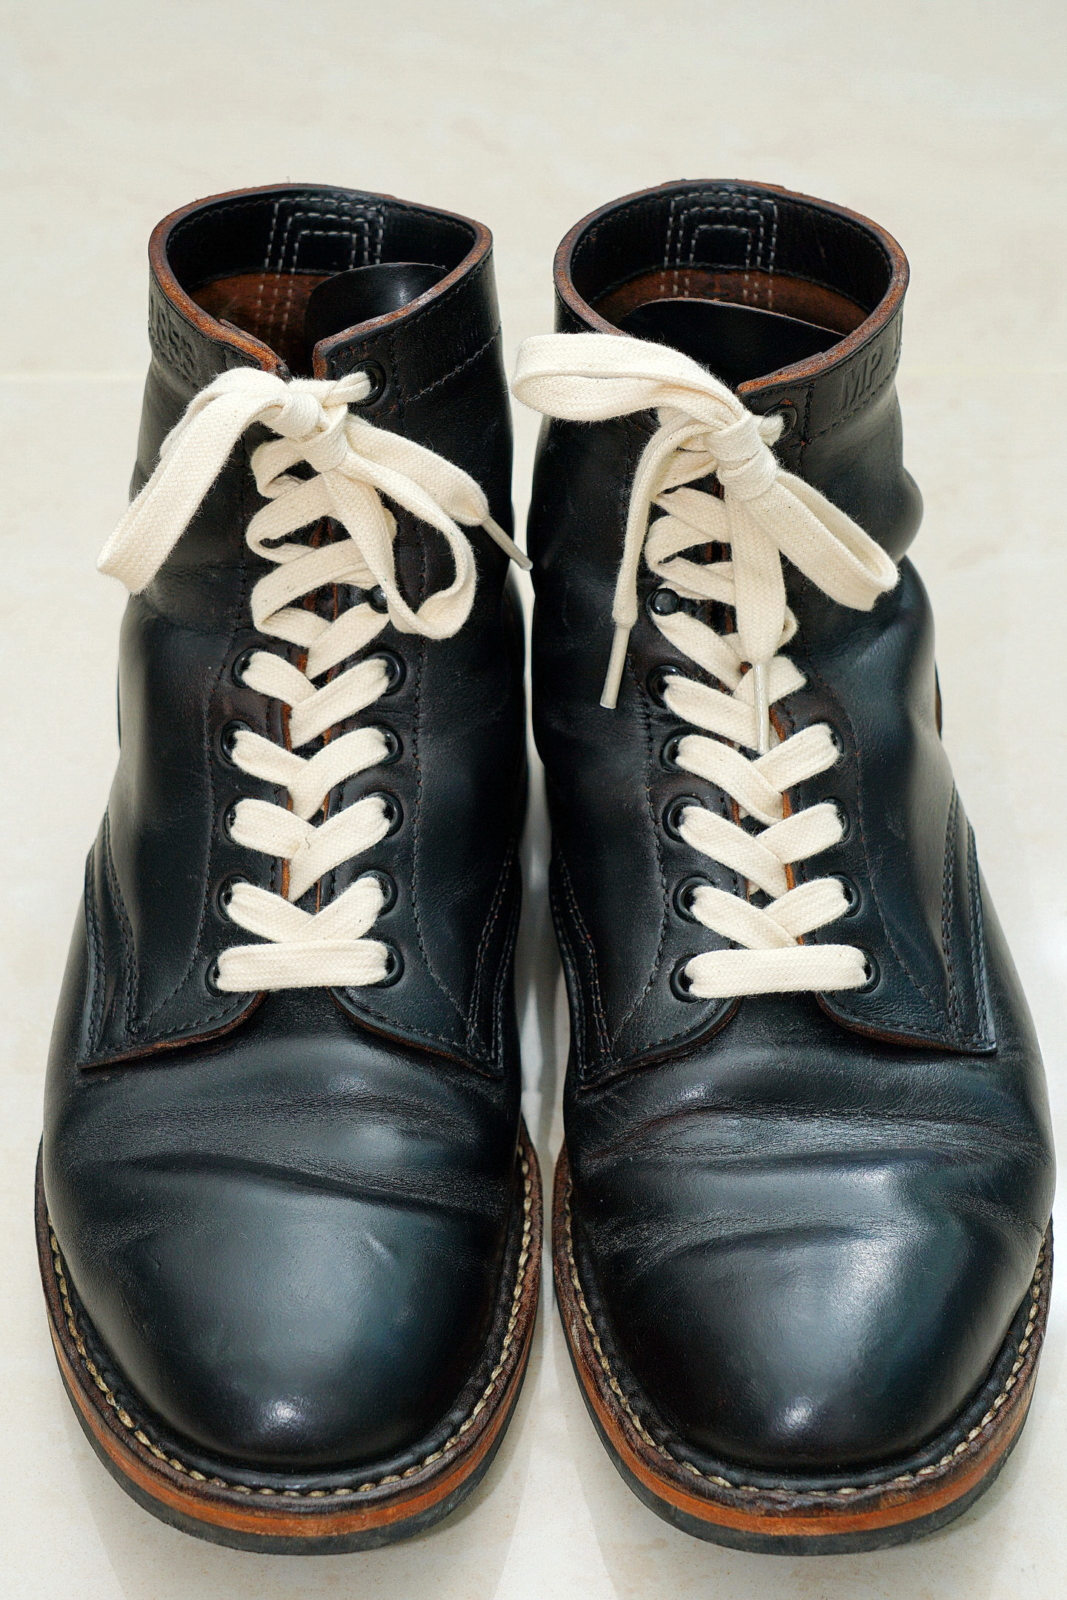 White's MP Service Boots 5Inches Horween CXL BLK 軍警靴，正面